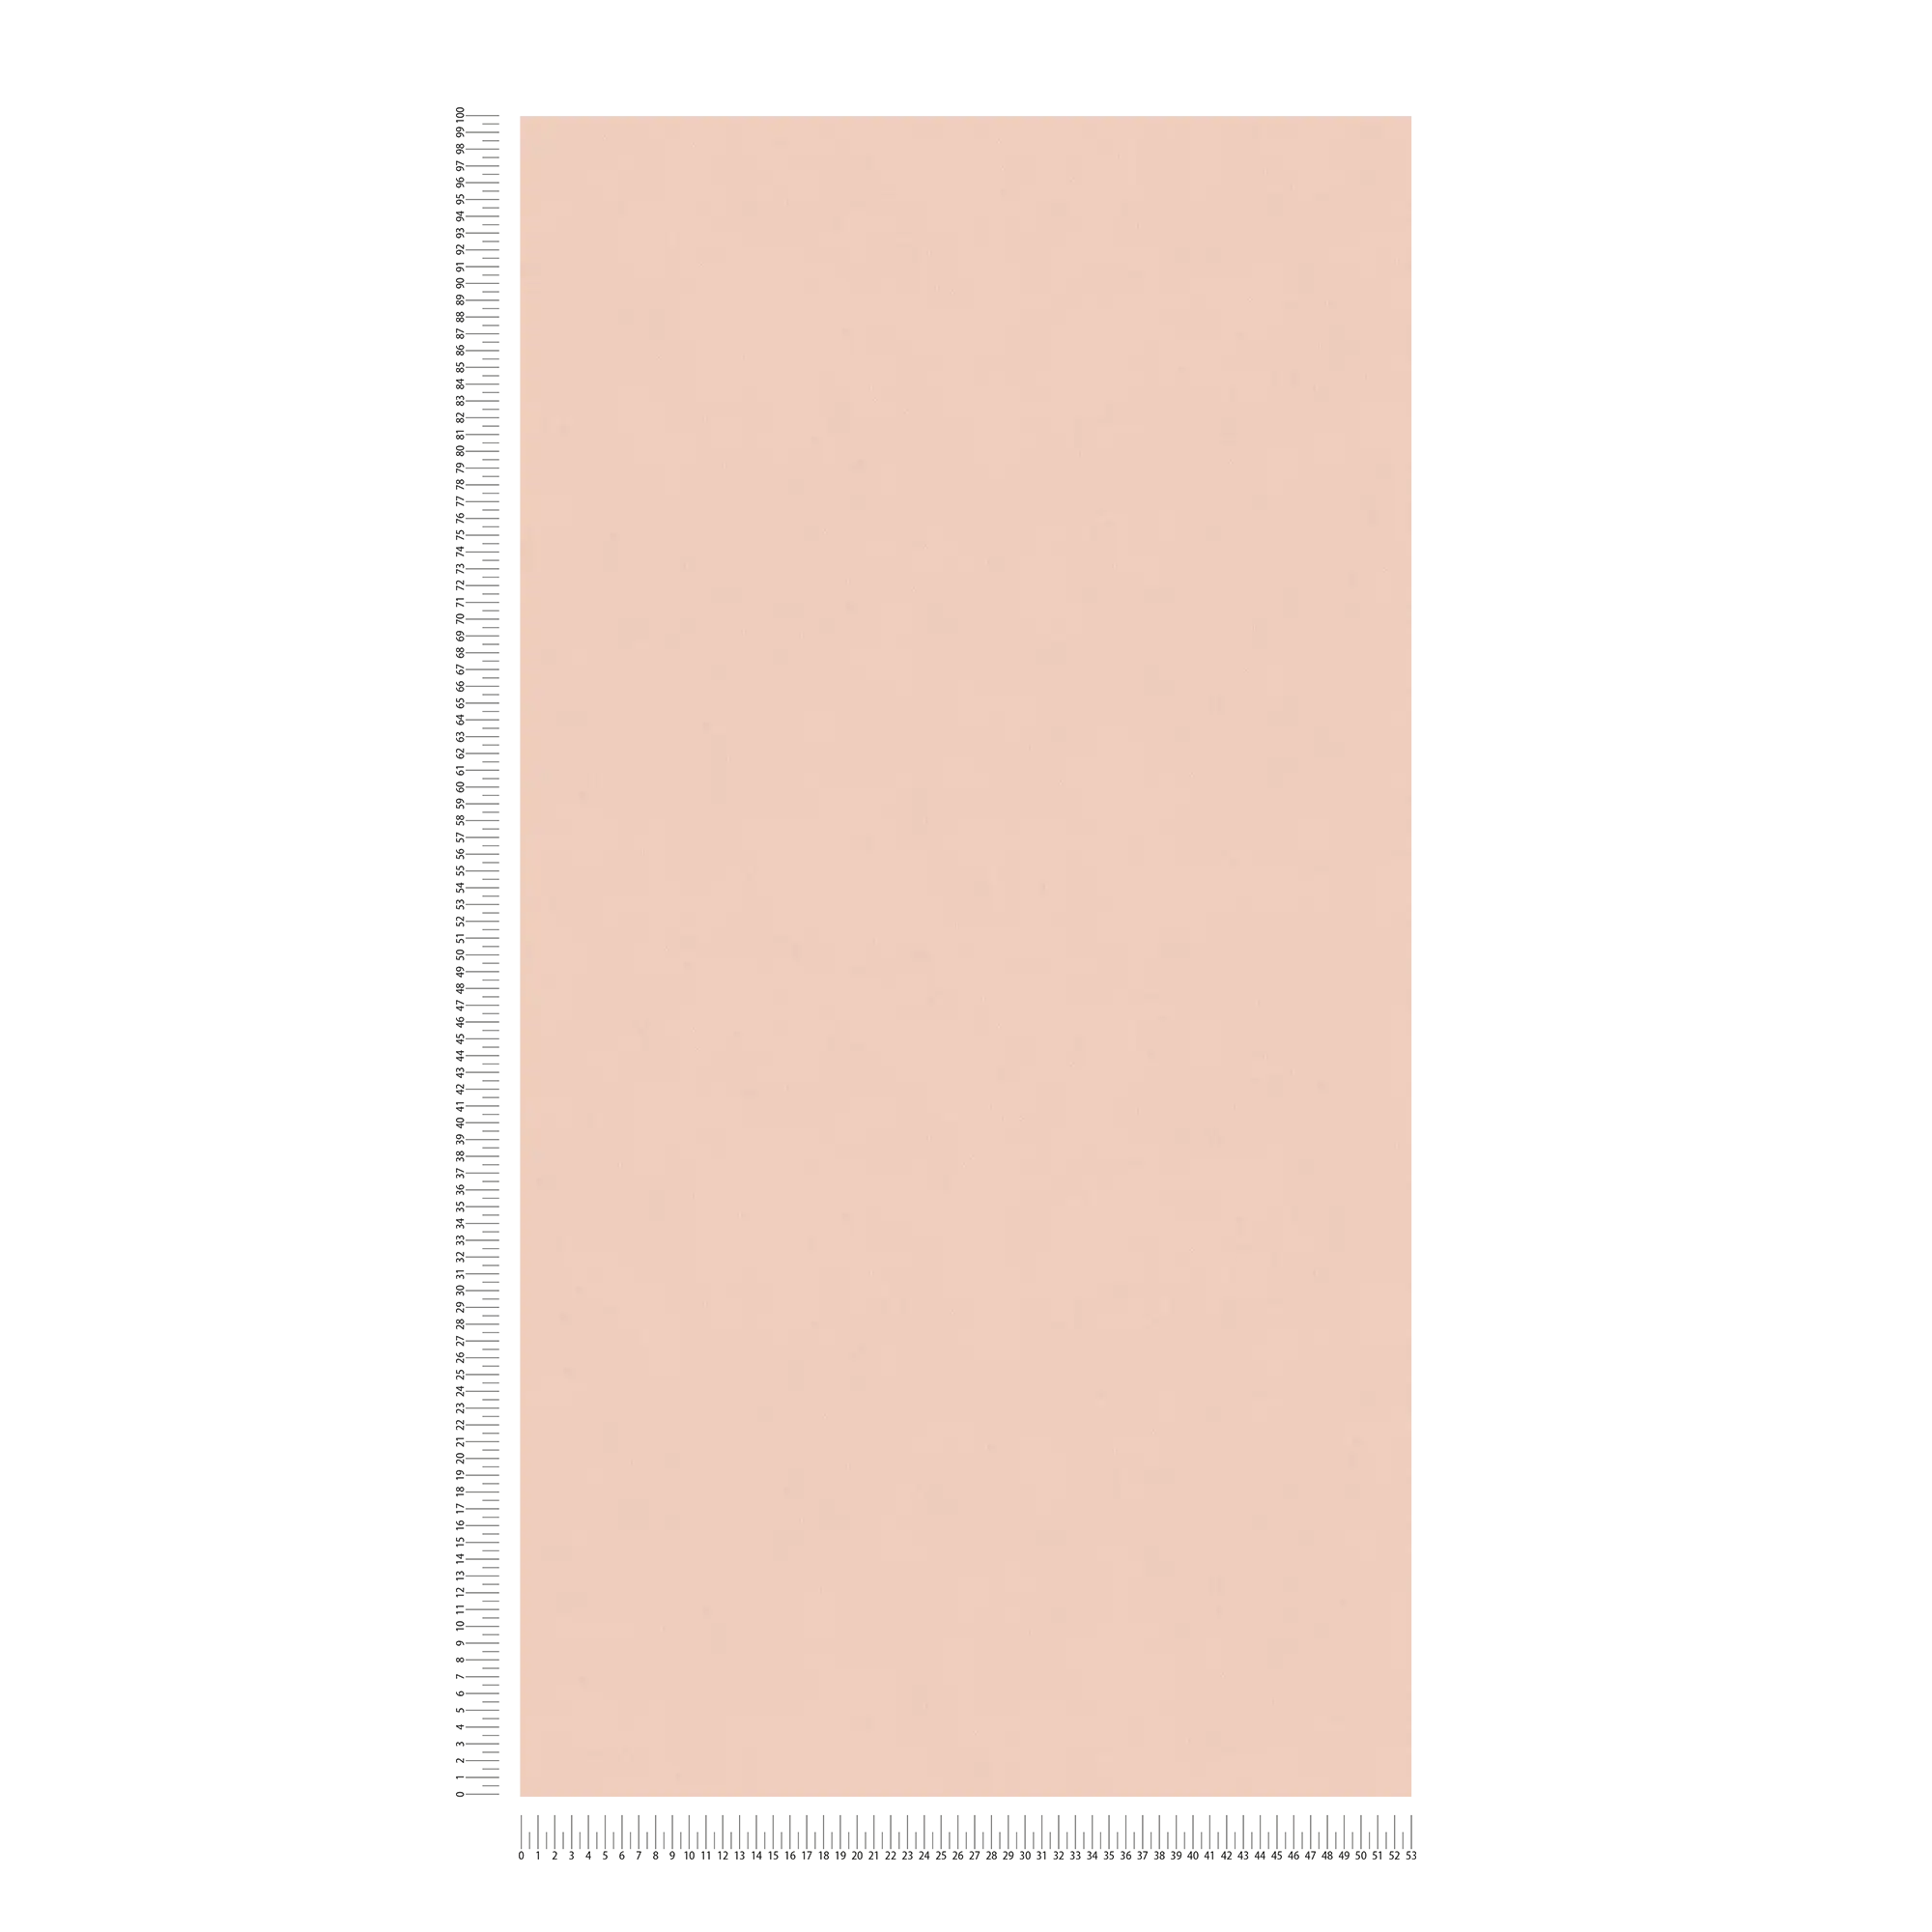             Plain wallpaper with plaster pattern - pink
        